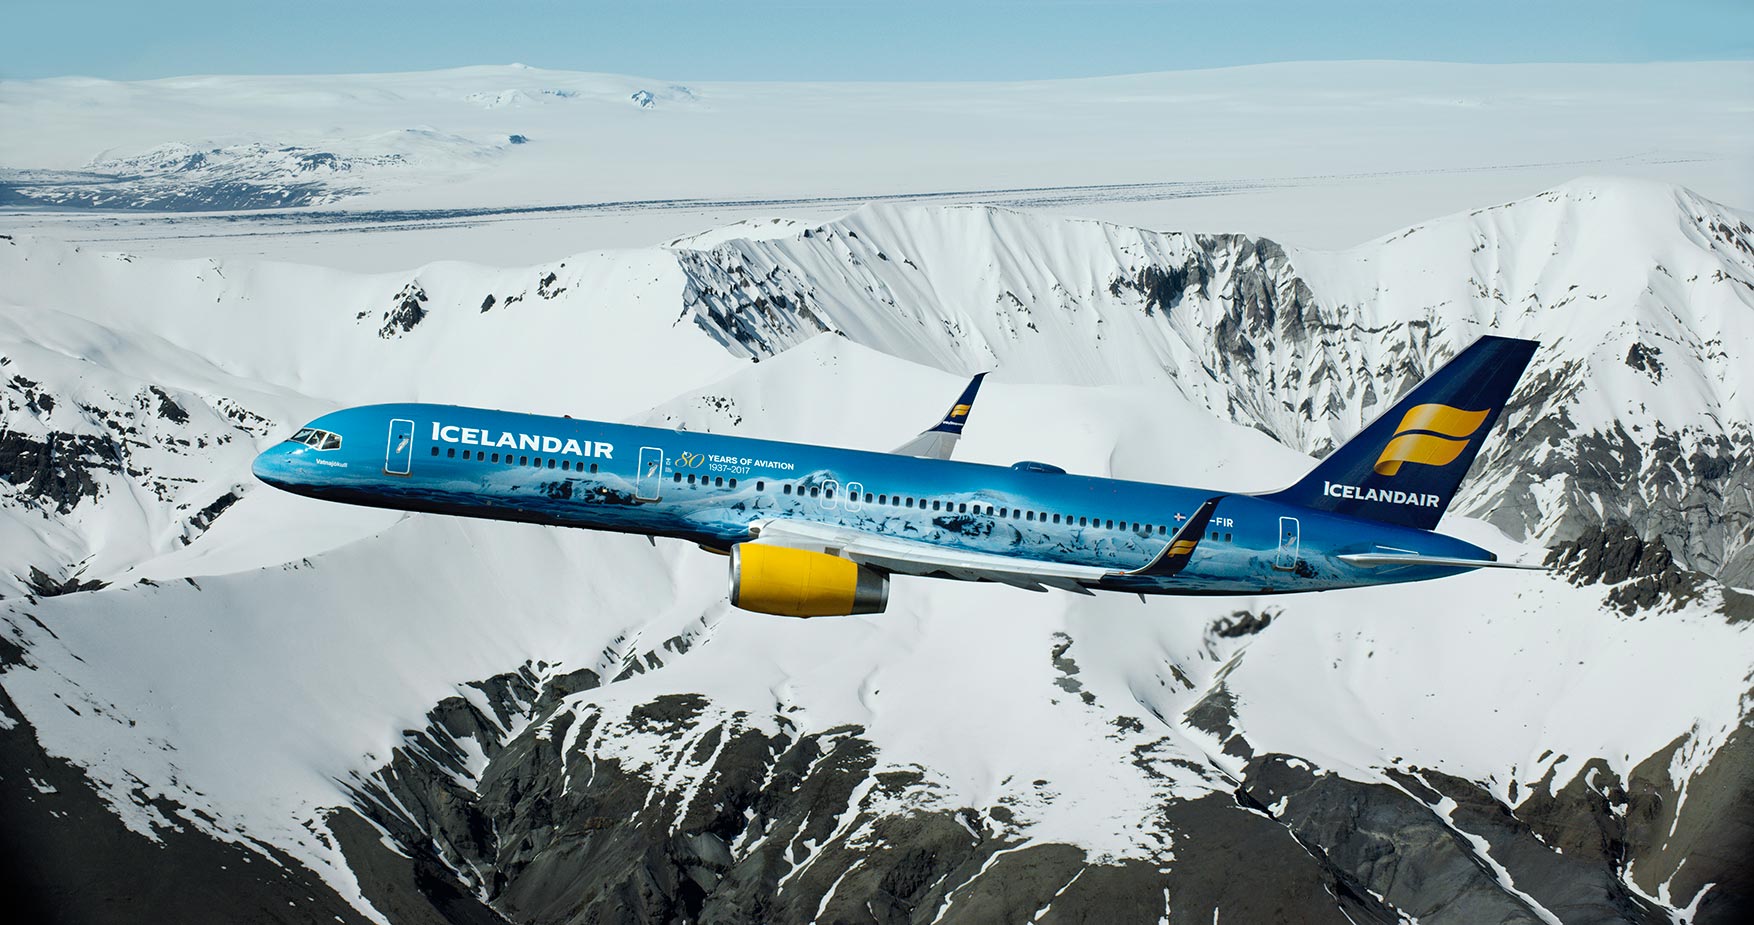 An Icelandair plane with a spraypaint design to pay tribute to Vatnajokull glacier, flying over snowy mountains in ICeland